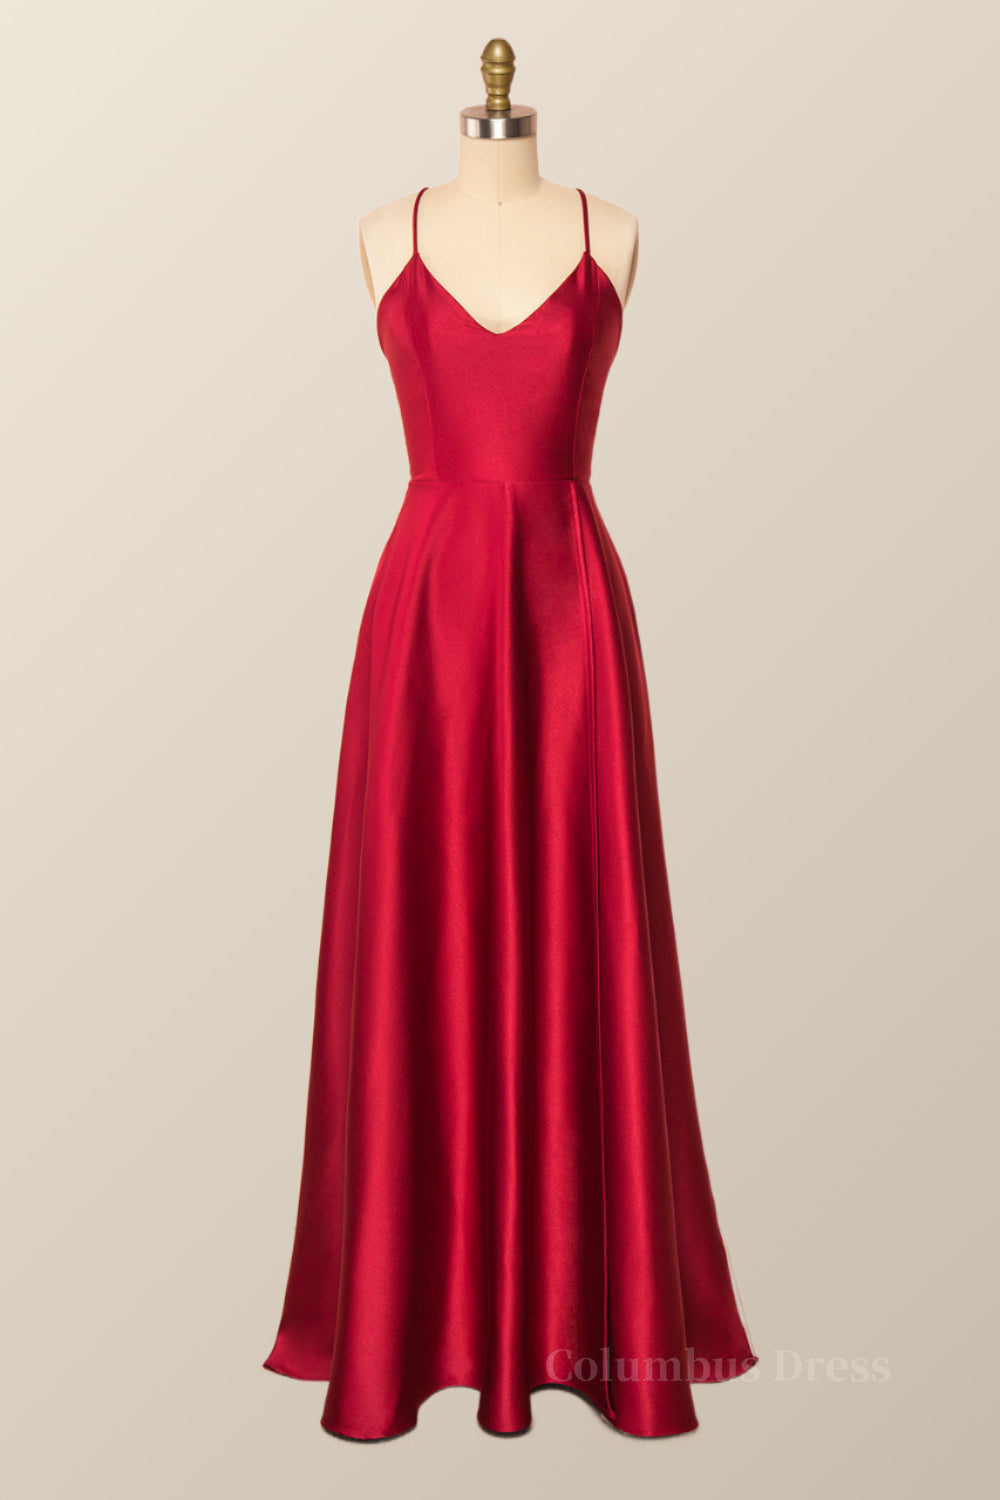 Formal Dress Shop Near Me, Simple Straps Red Long Party Dress